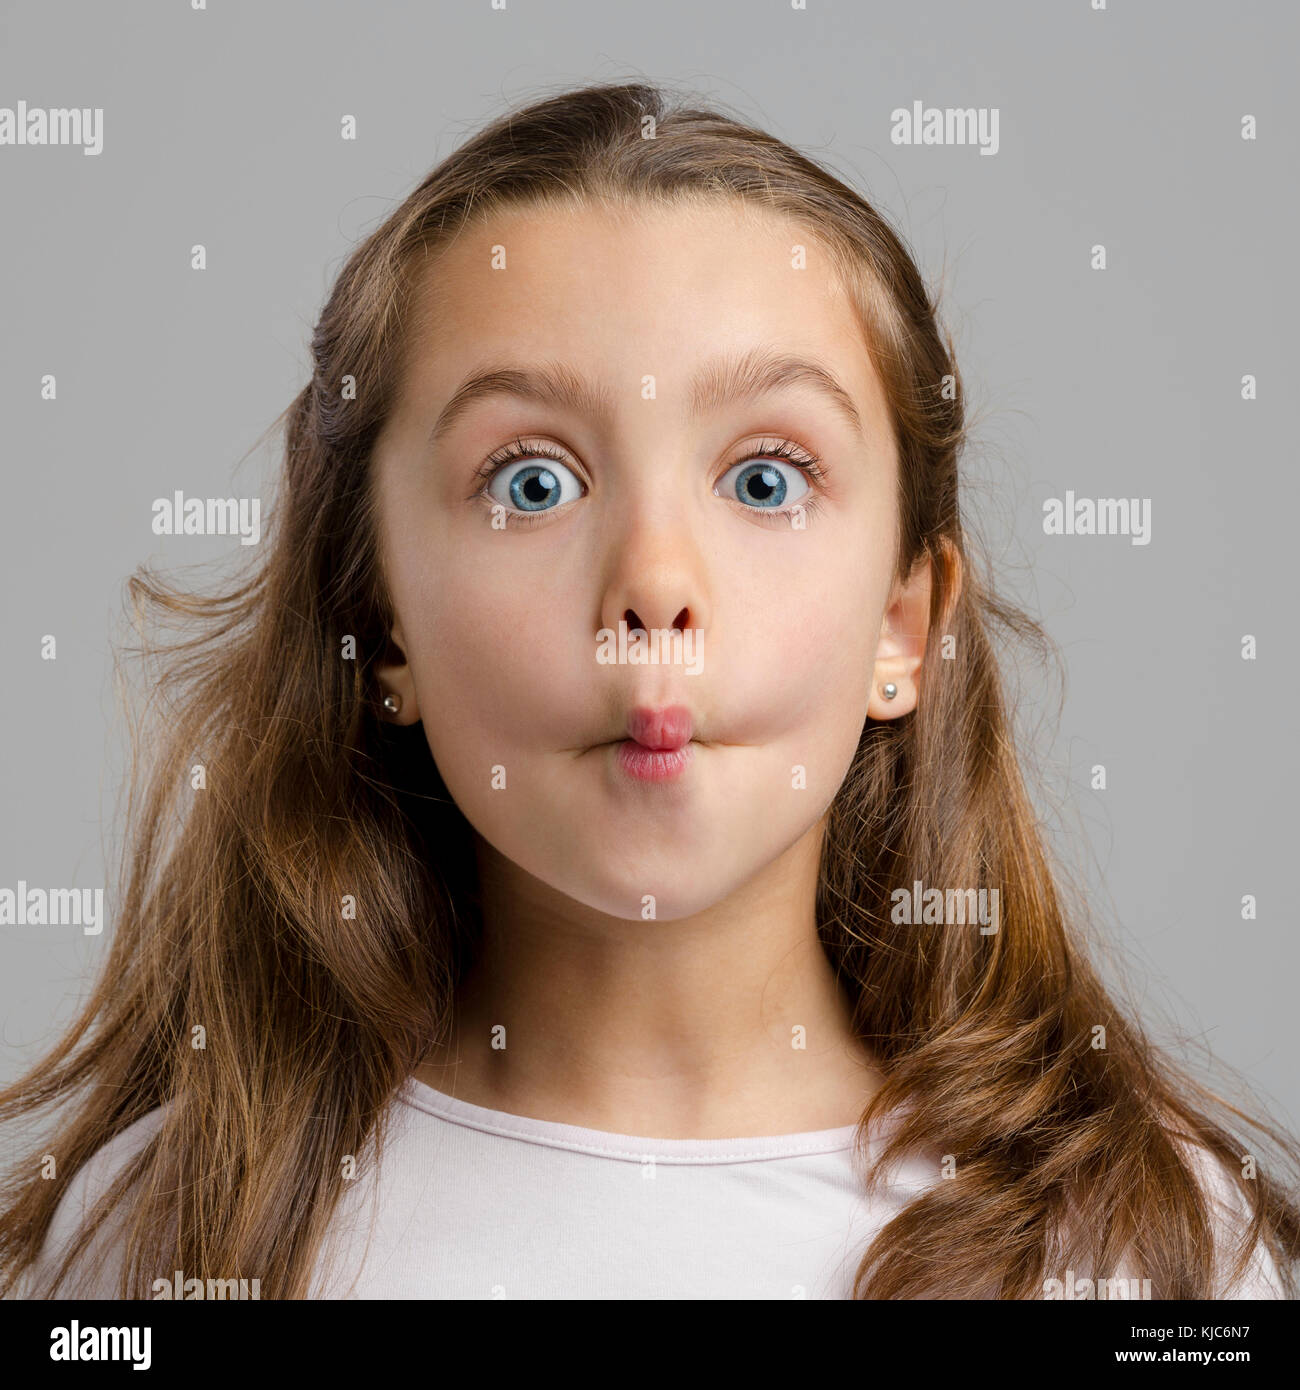 Portrait of a little girl with a funny expression Stock Photo